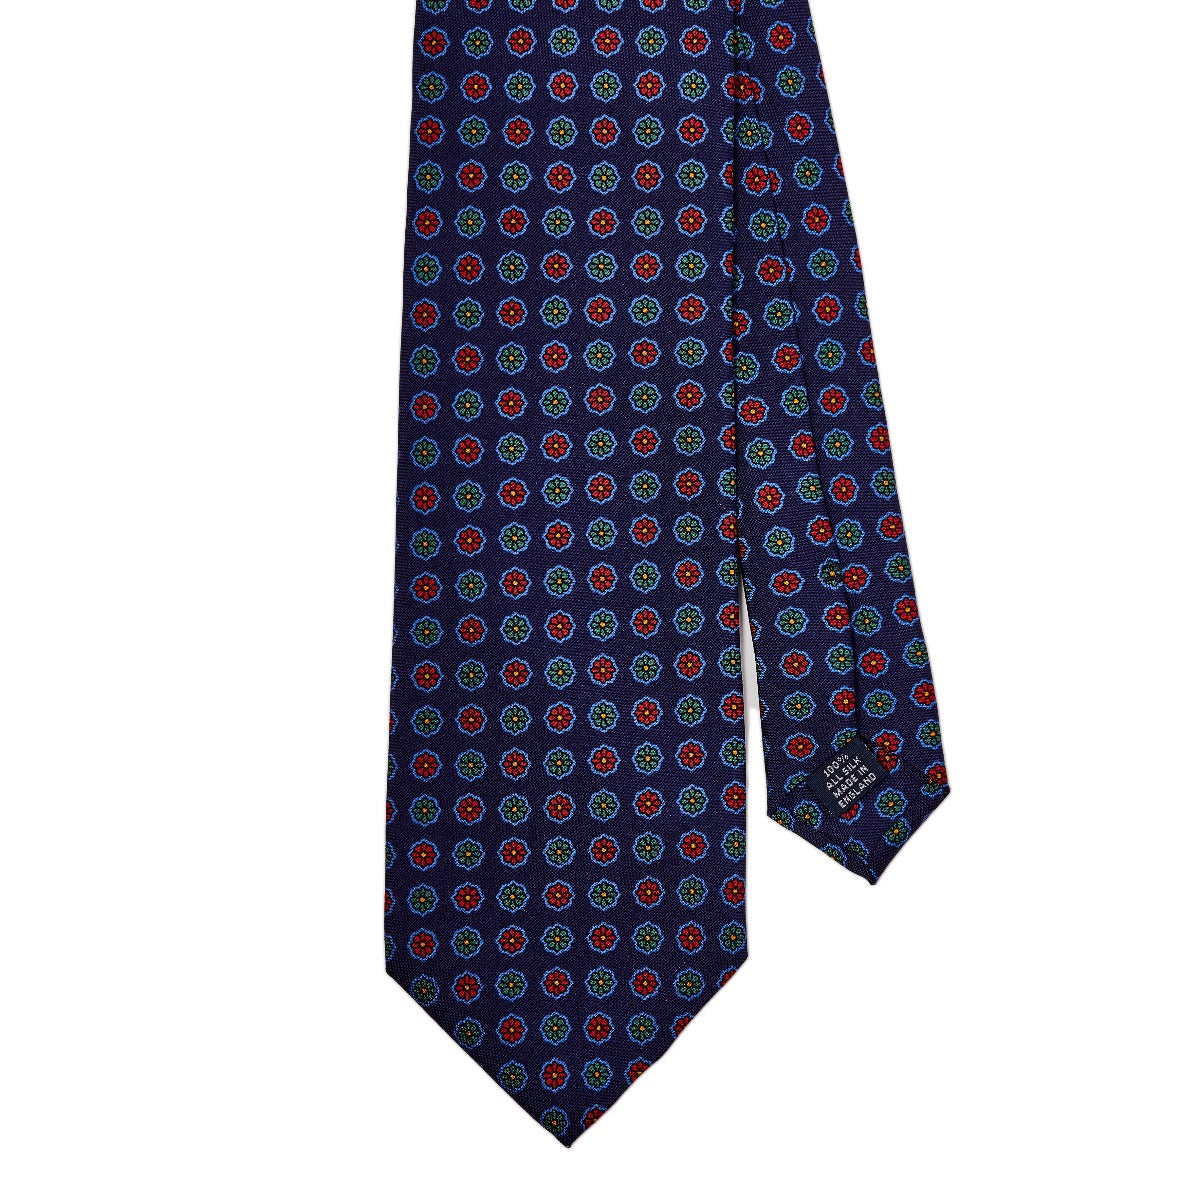 KirbyAllison.com's Sovereign Grade Red Floral 25 oz Hopsack Silk Tie is a tie with circles.